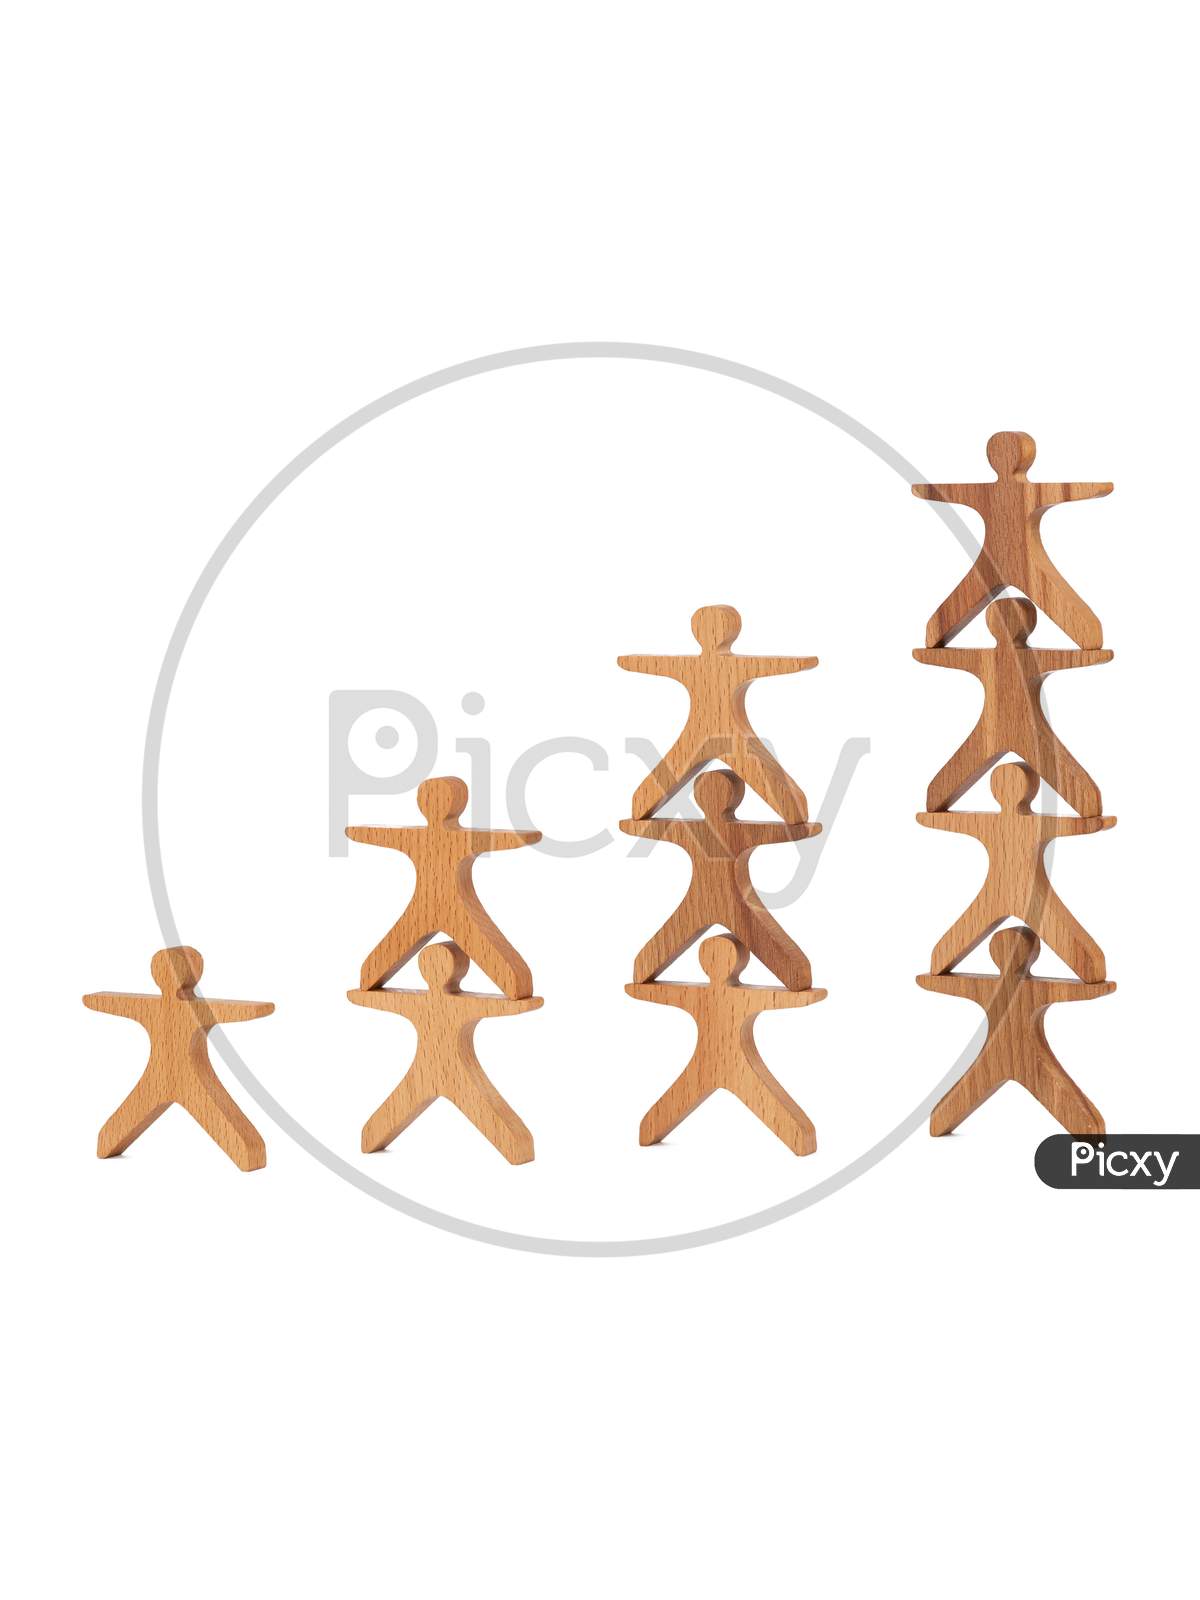 Close-Up Of A Children'S Toy Made Of Natural Wood In The Form Of Little People Stand Pyramid On A White Isolated Background. Eco-Friendly Toy For Parents And Children